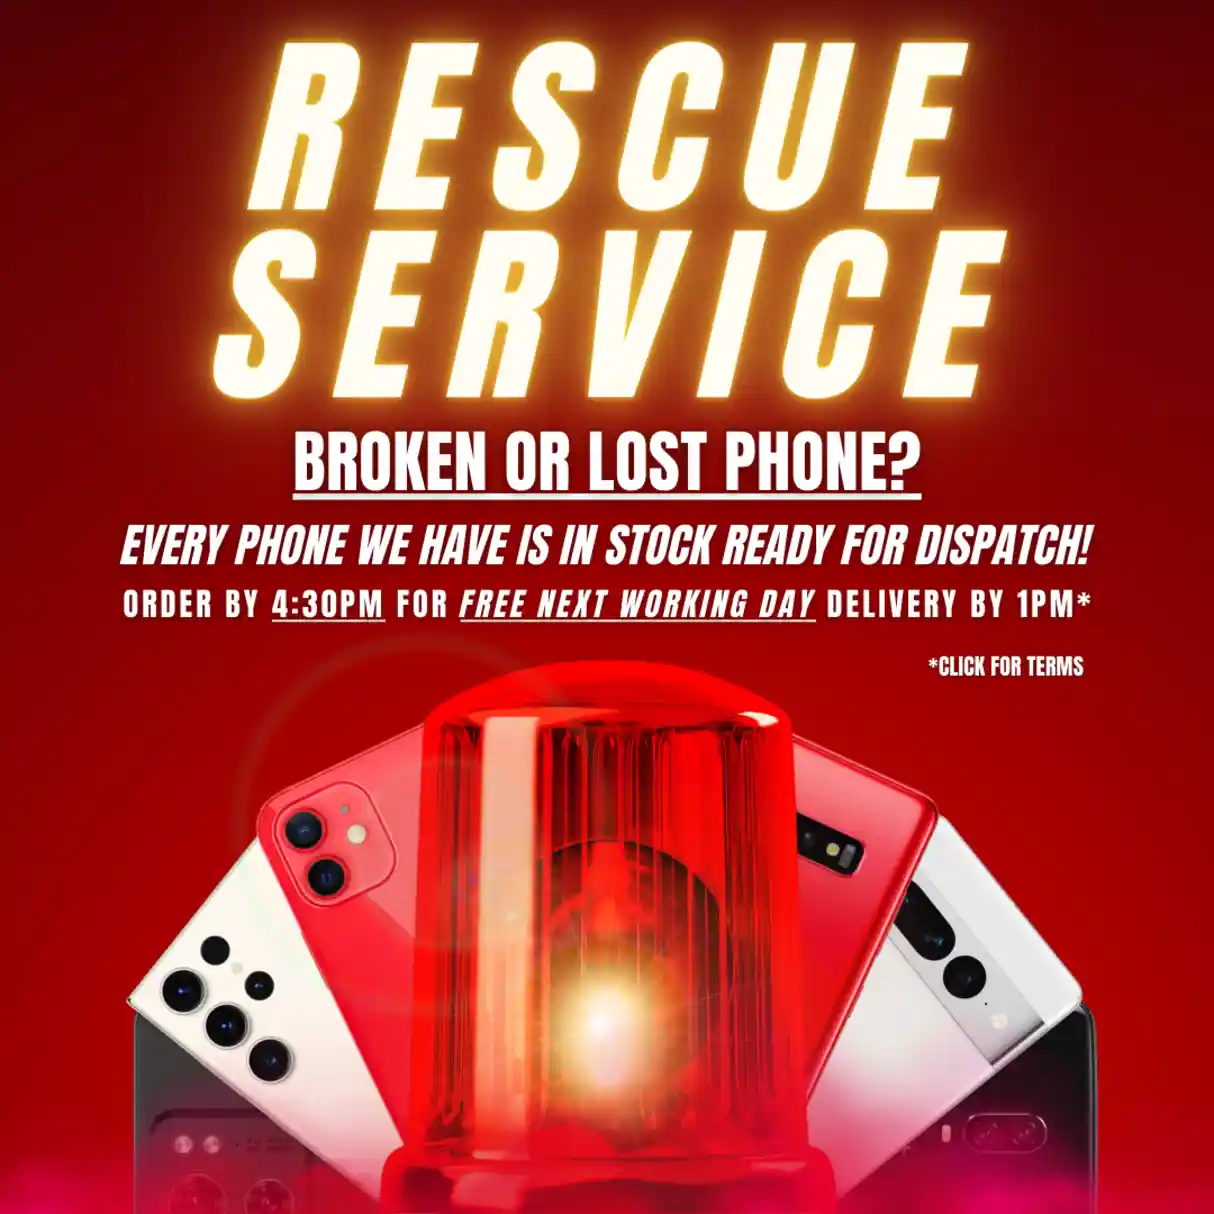 Rescue service. Broken or lost phone? Every phone we have is in stock and ready for dispatch.